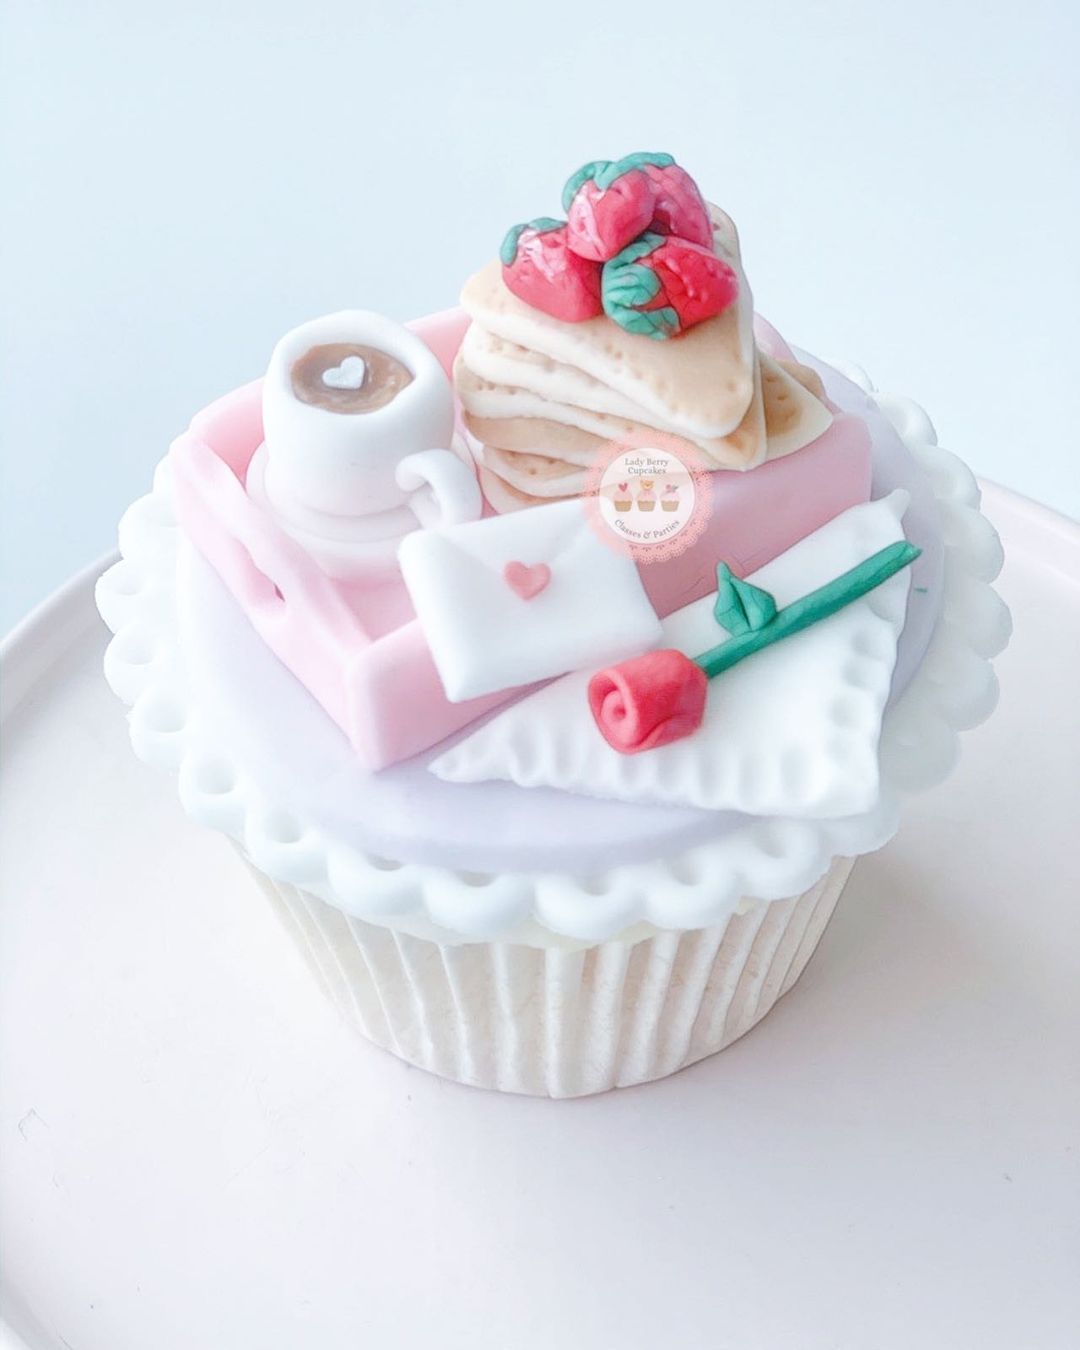 Lady-Berry-Cupcakes..-1 Top 10 Online Cake Decorating Classes of 2022